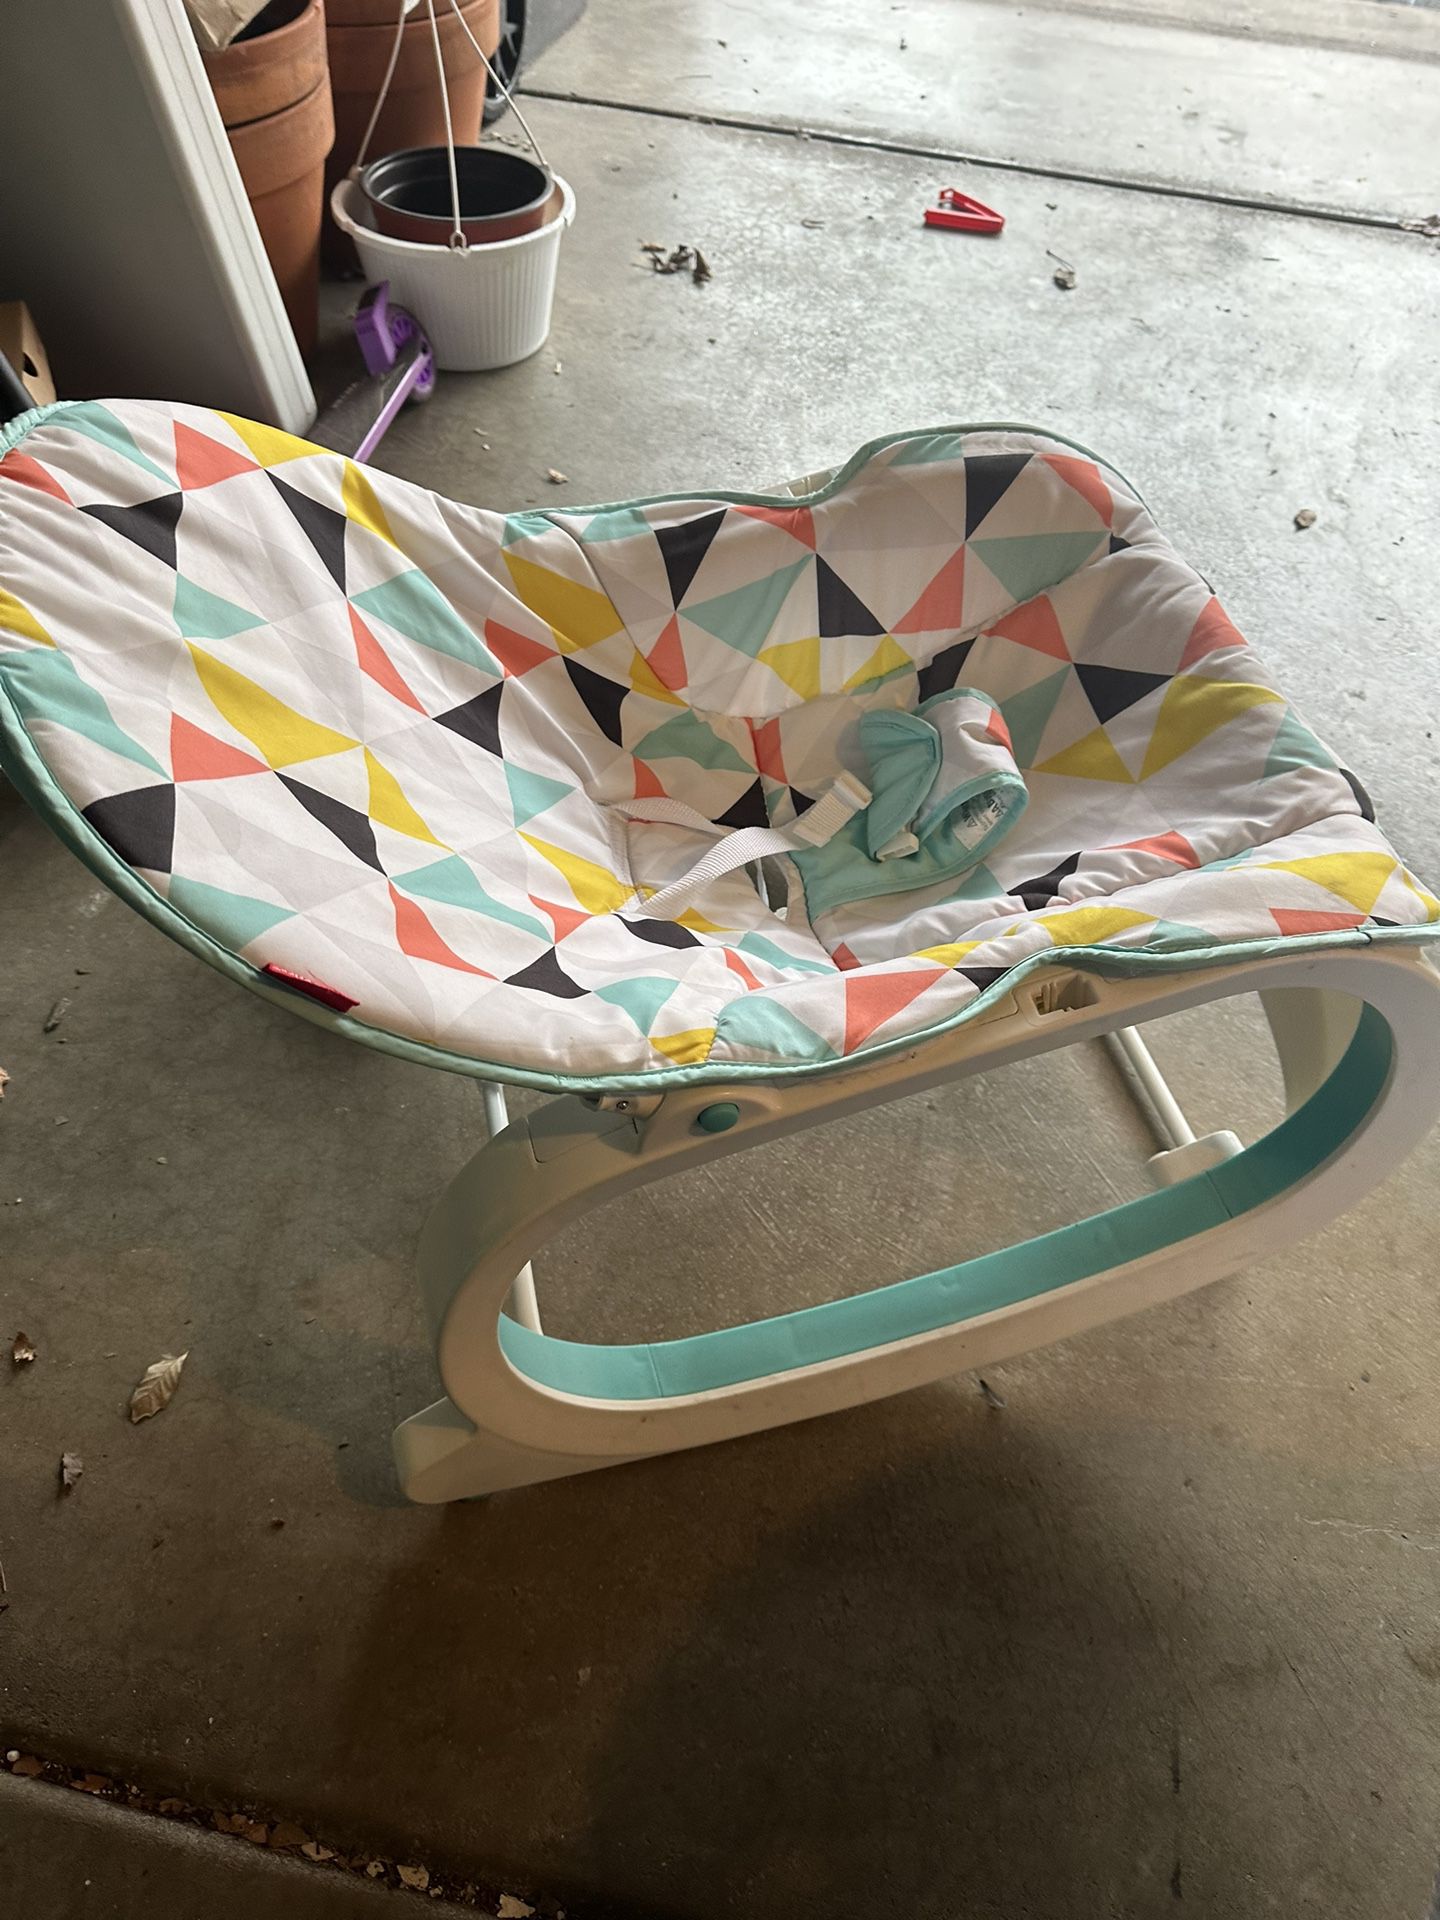 Baby Rocker And Seat 